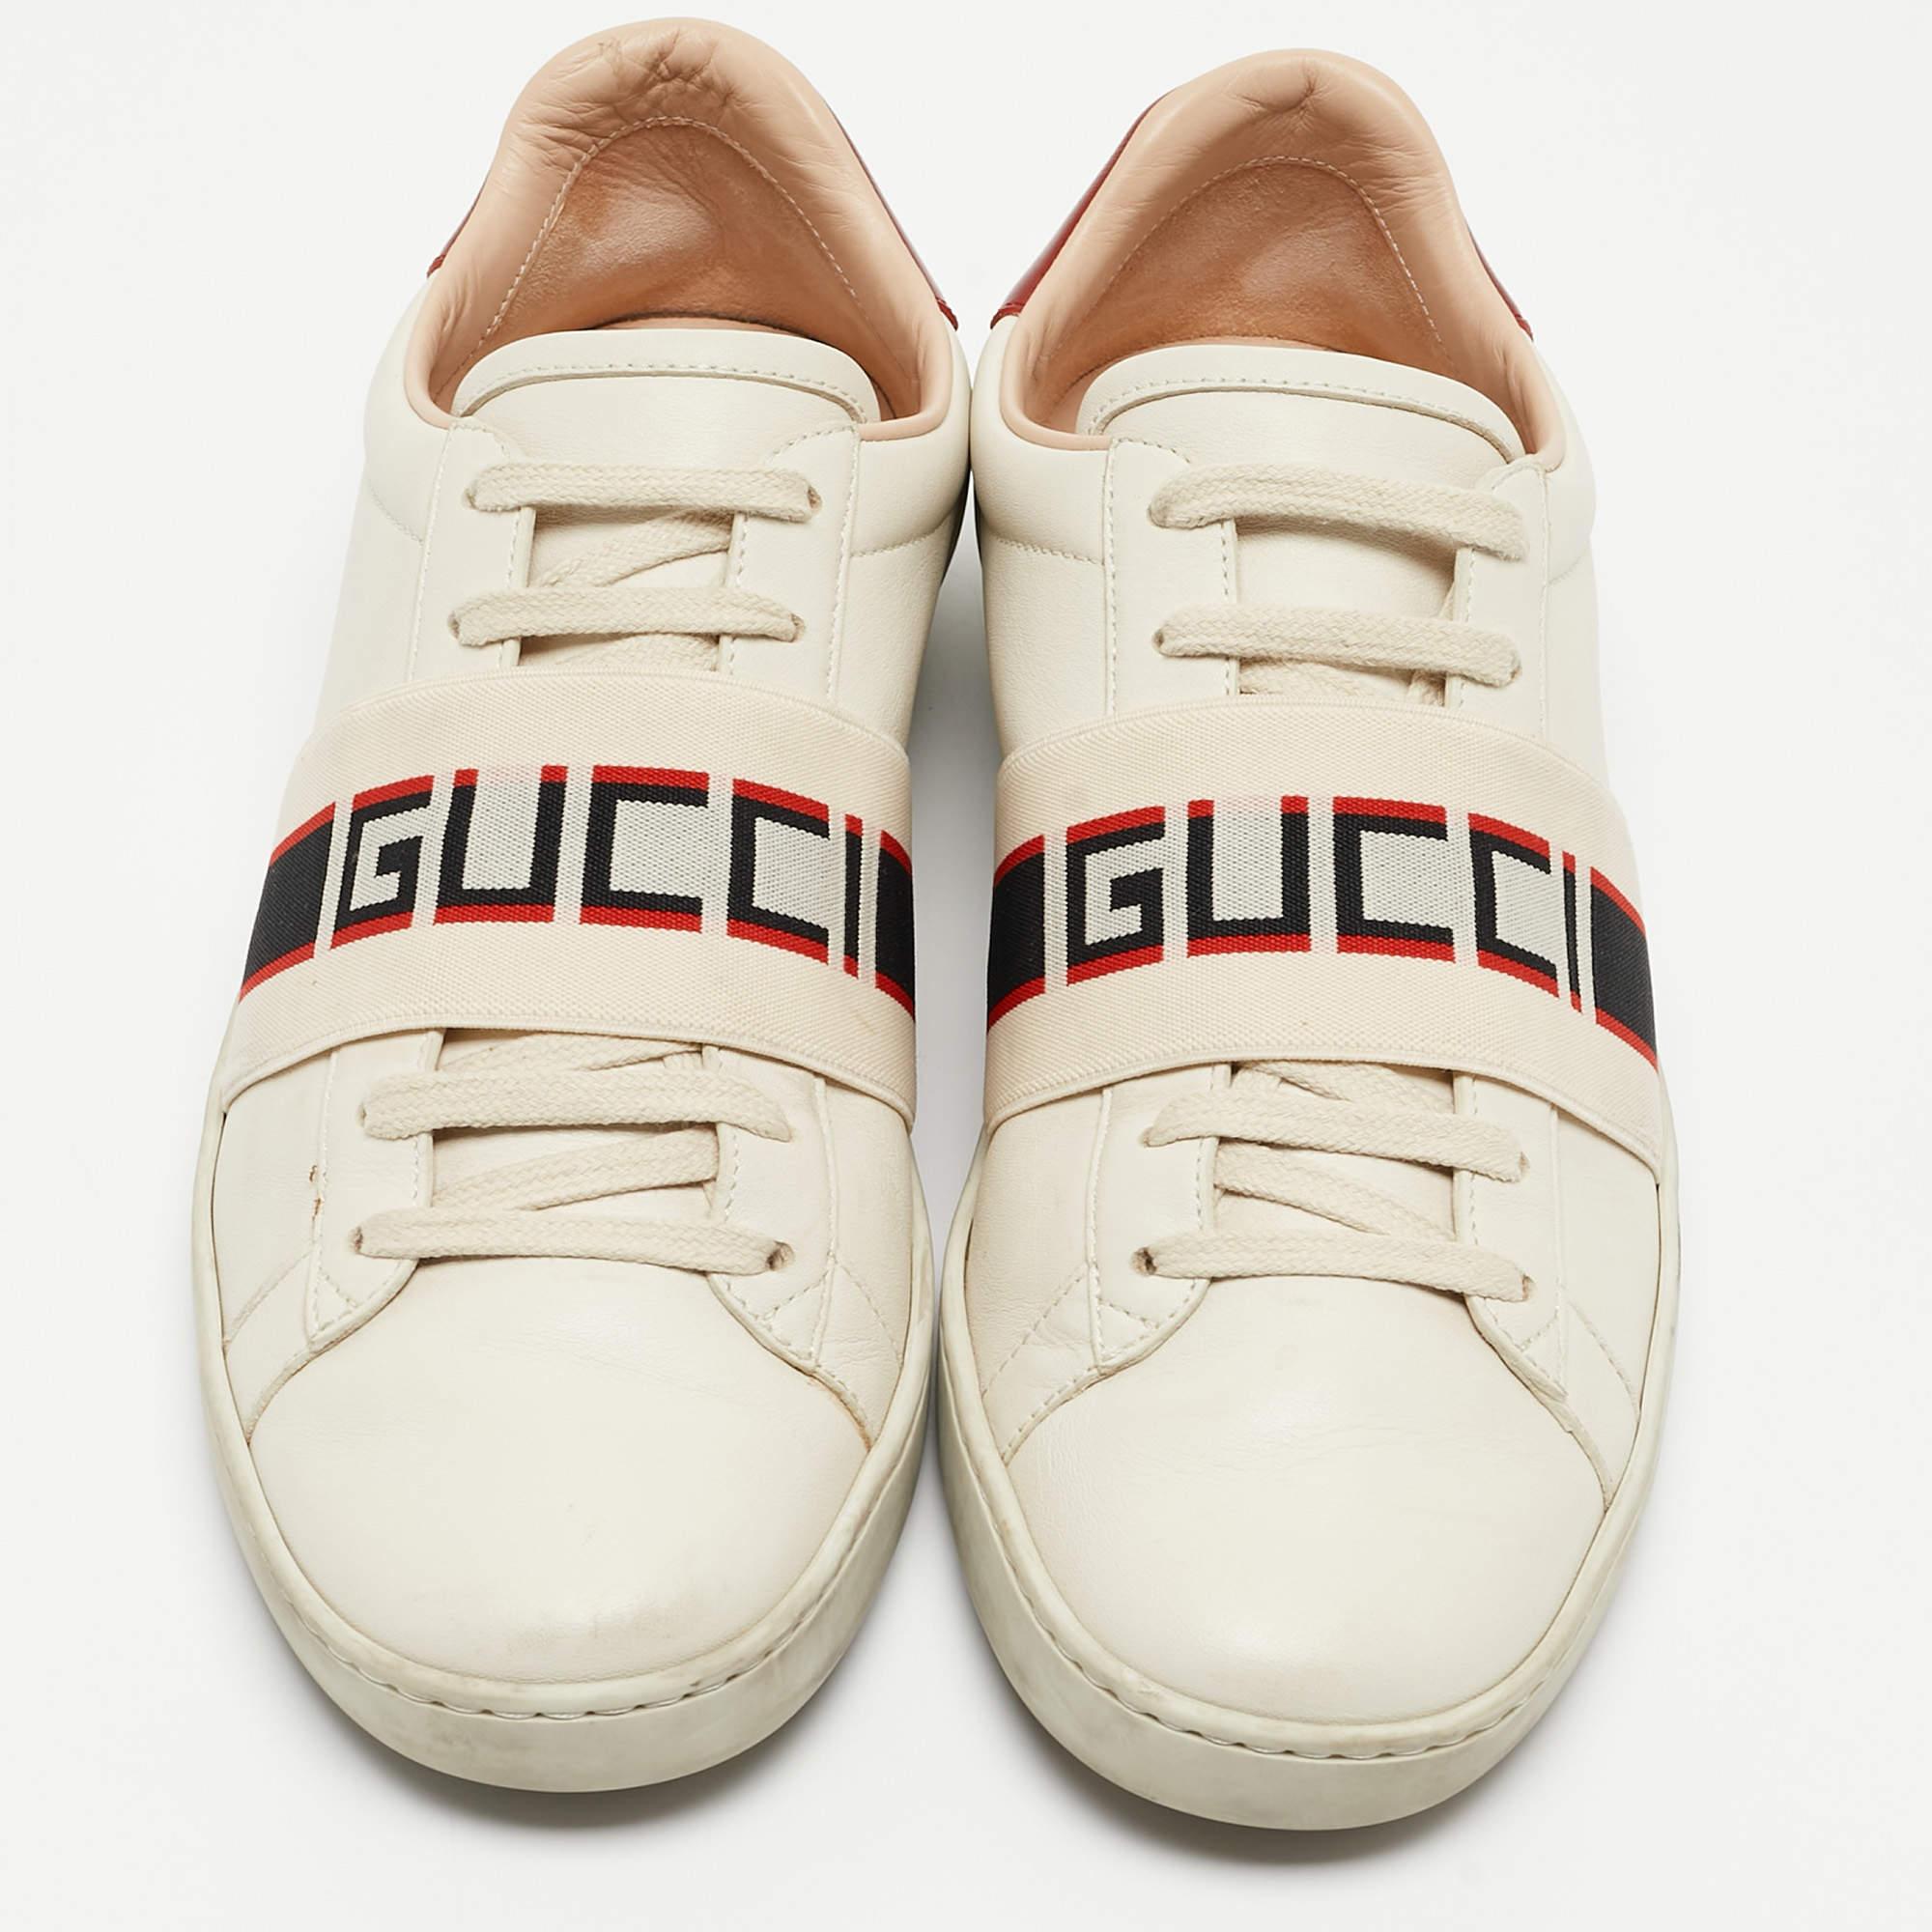 These Gucci sneakers will lend you an edgy chic appearance. Crafted from leather, they get a luxe update with a branded stretch band on their lace-up vamps and are comfortable with rubber soles.

